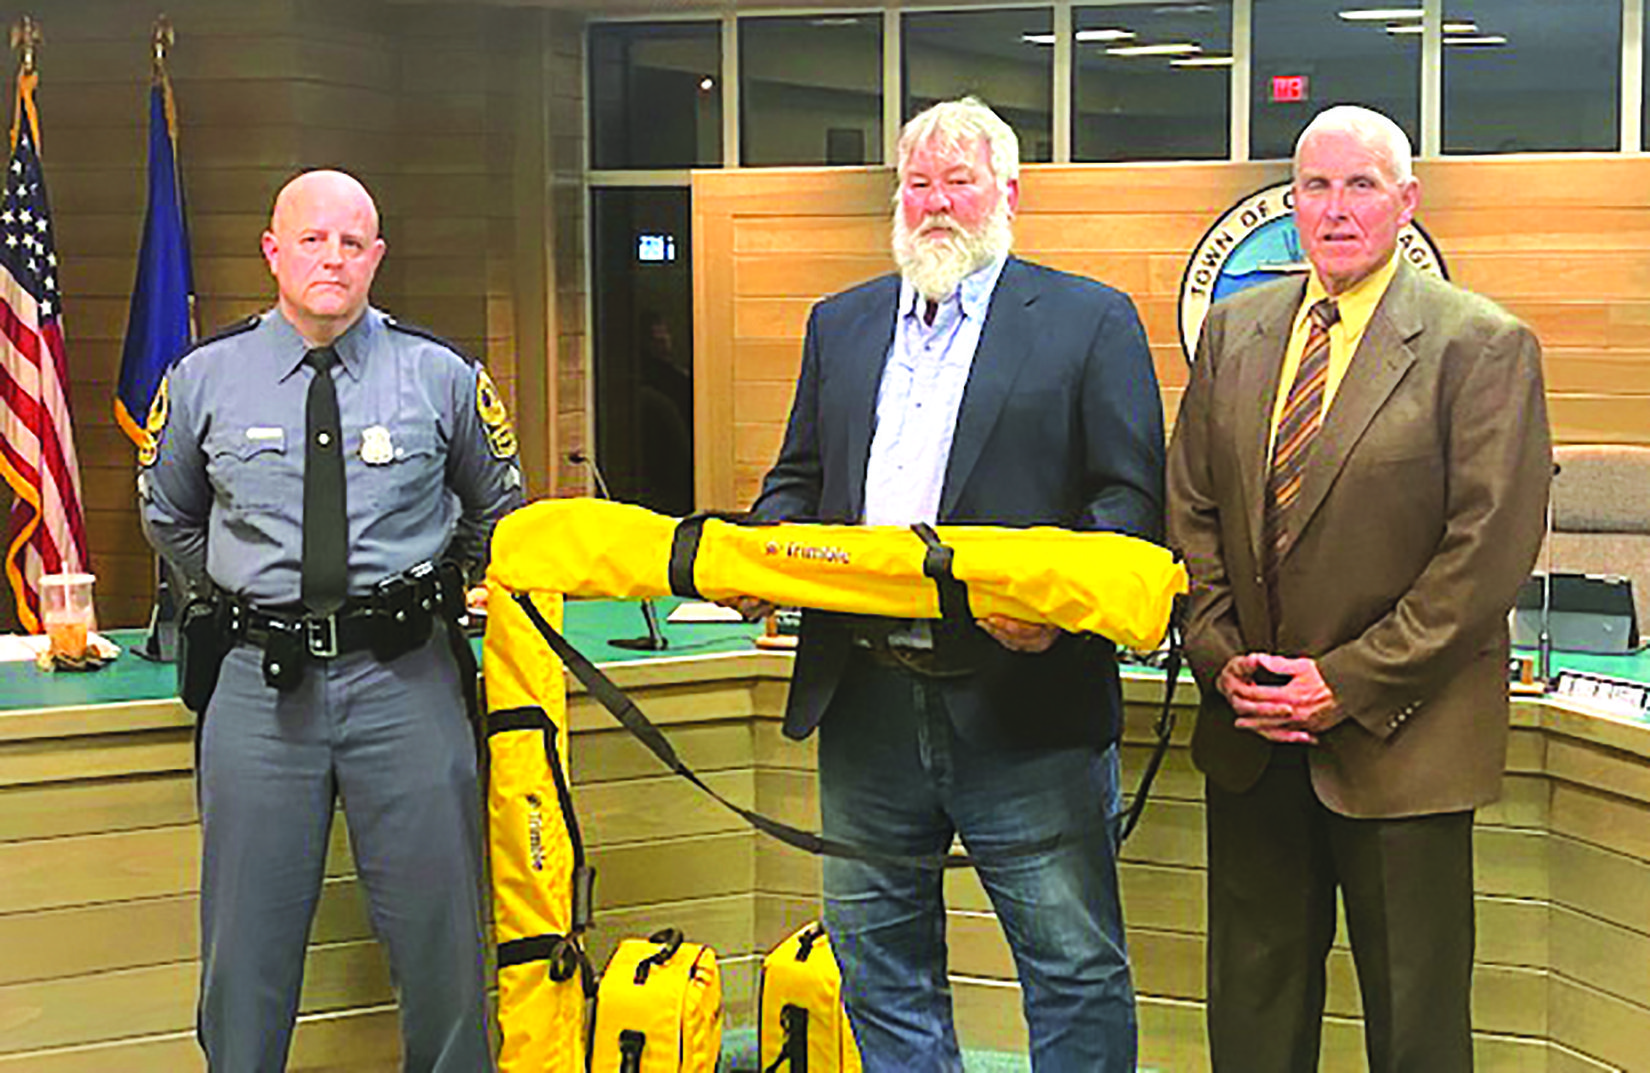 chincoteague-presents-crash-investigation-equipment-to-state-police